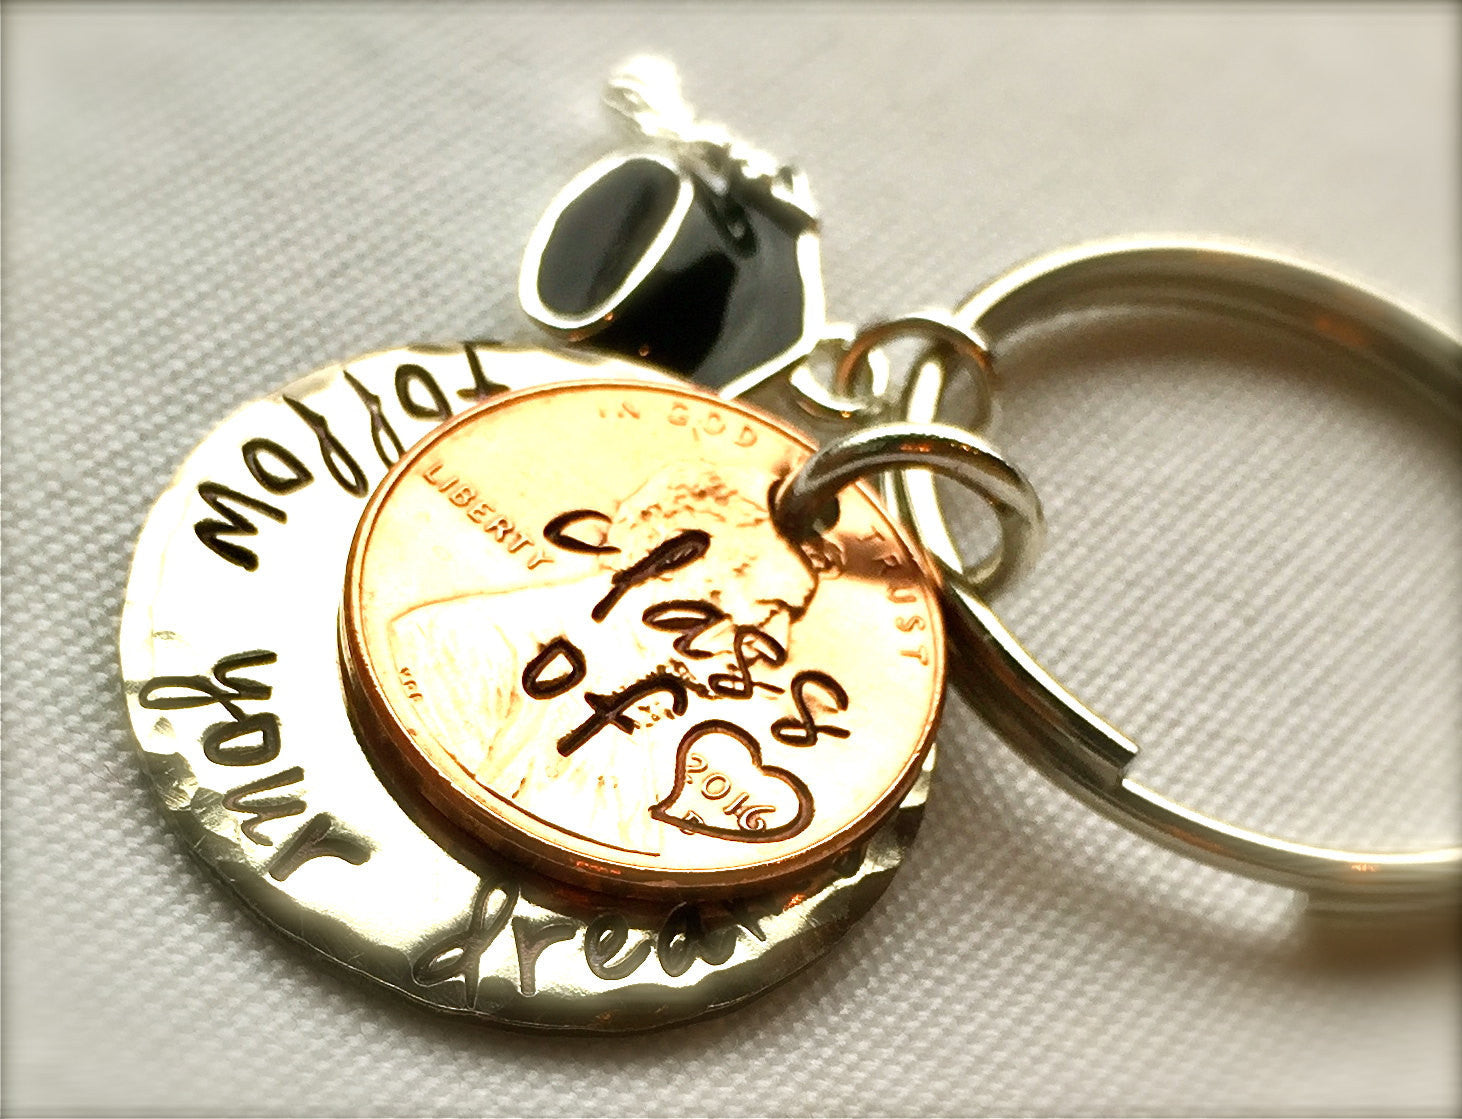 Black and Gold Bracelet Key Chain with Monogrammed Disc